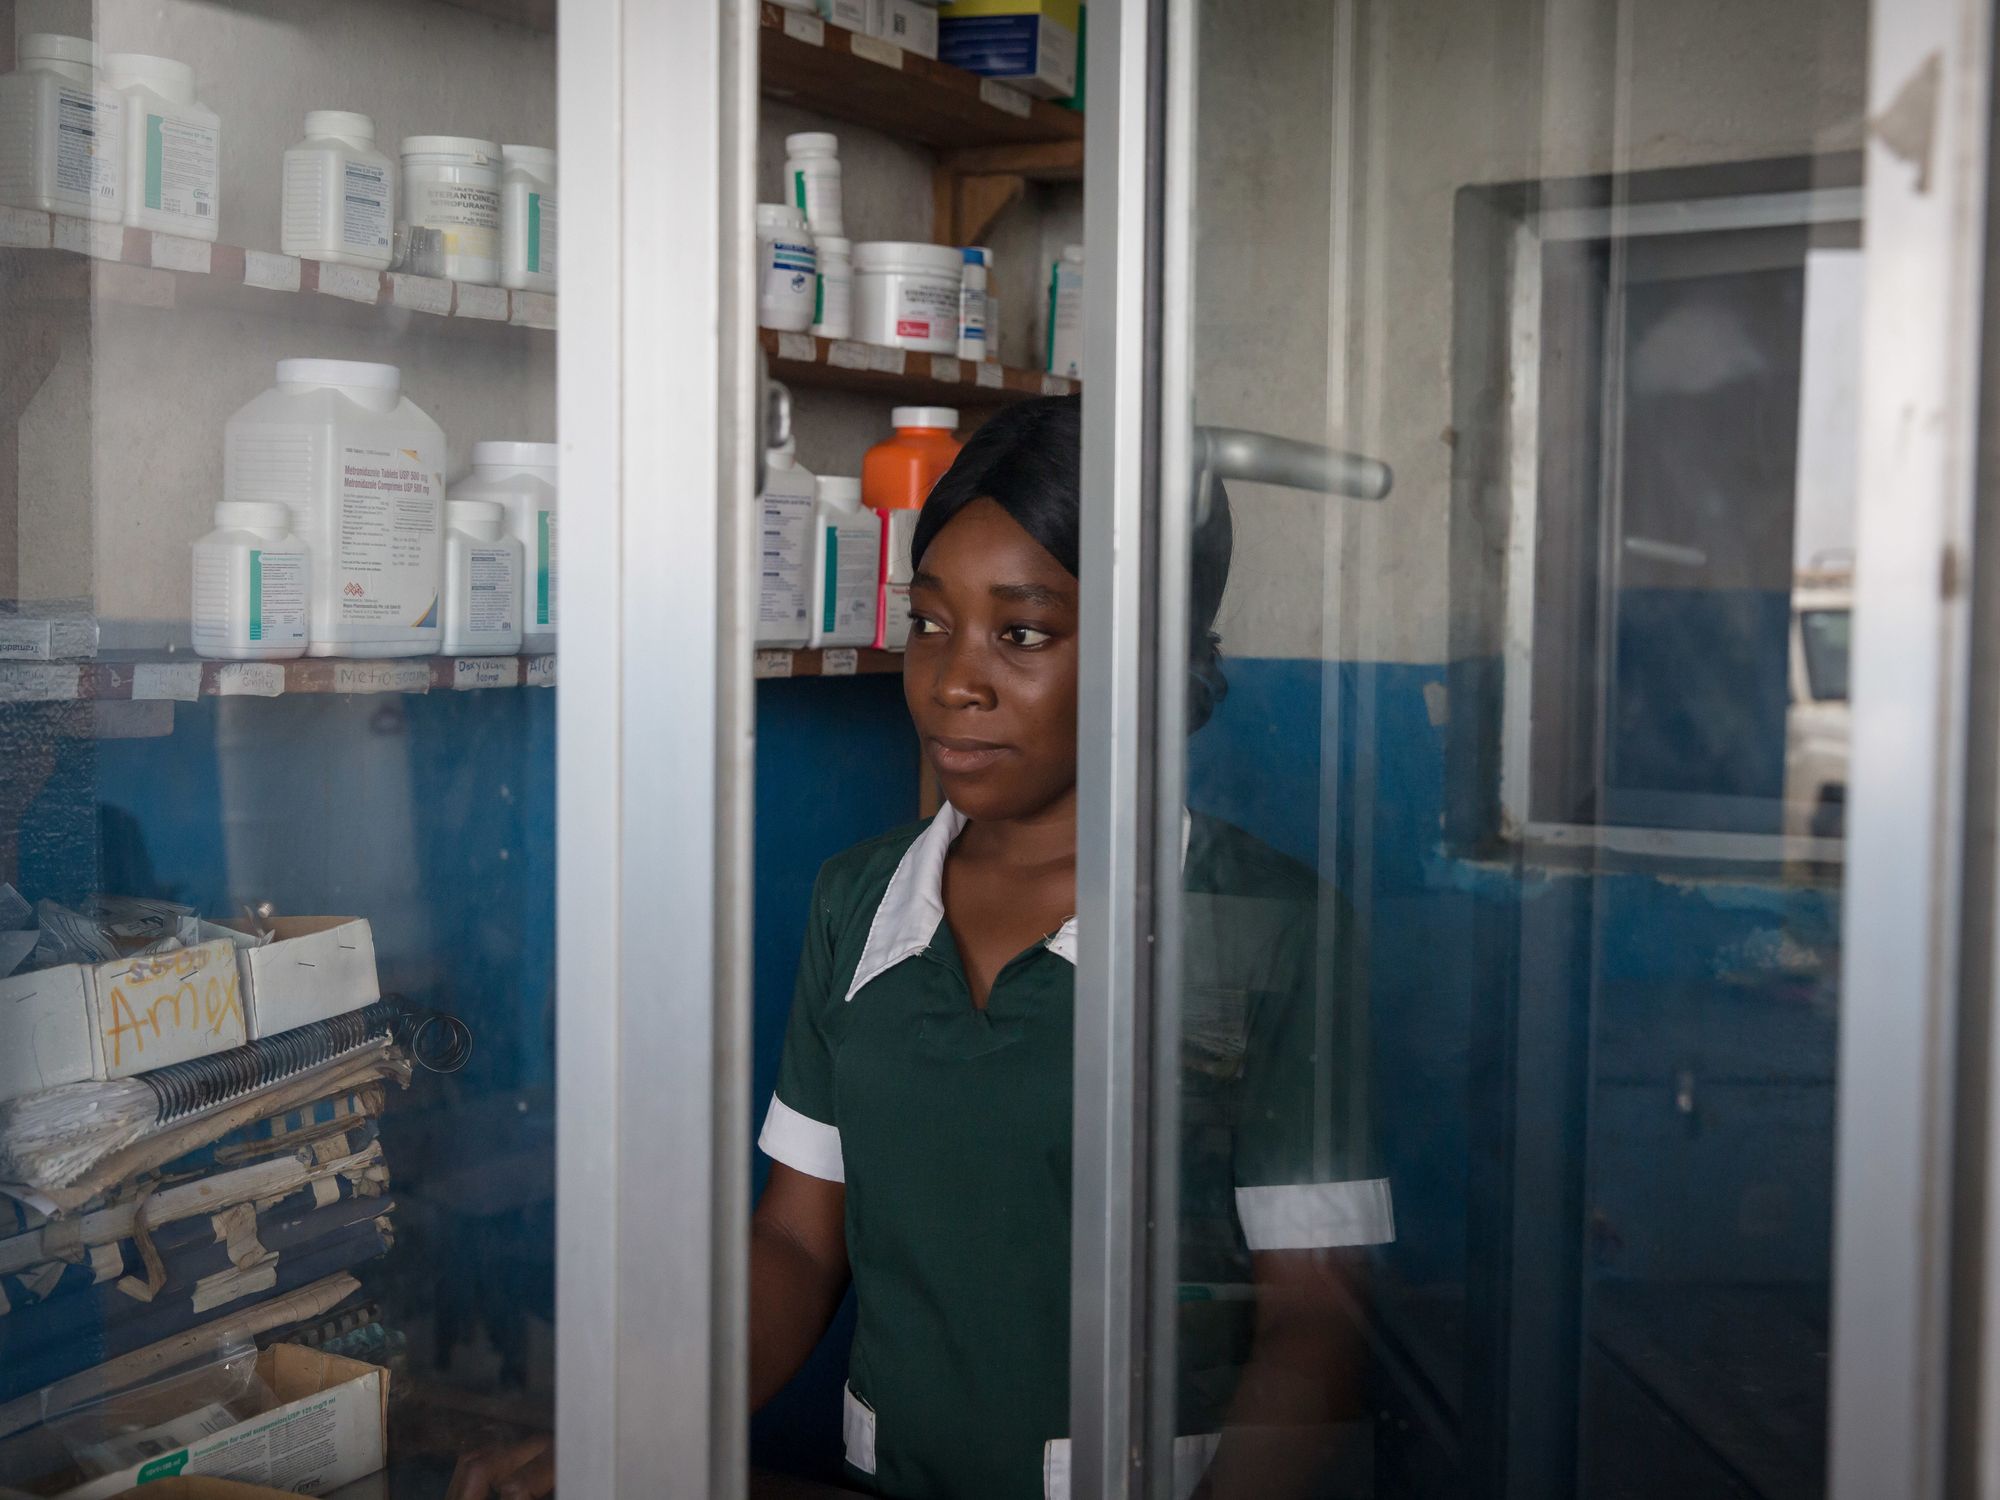 MARYLAND, LIBERIA - 2018/06/01: A medical worker seen standing in the pharmacy section of Pleebo Health Center, Maryland, southeast Liberia. Liberia is listed as one of the high-burden countries for tuberculosis by the World Health Organization. In September, the United Nations will hold the first-ever meeting on ending TB.